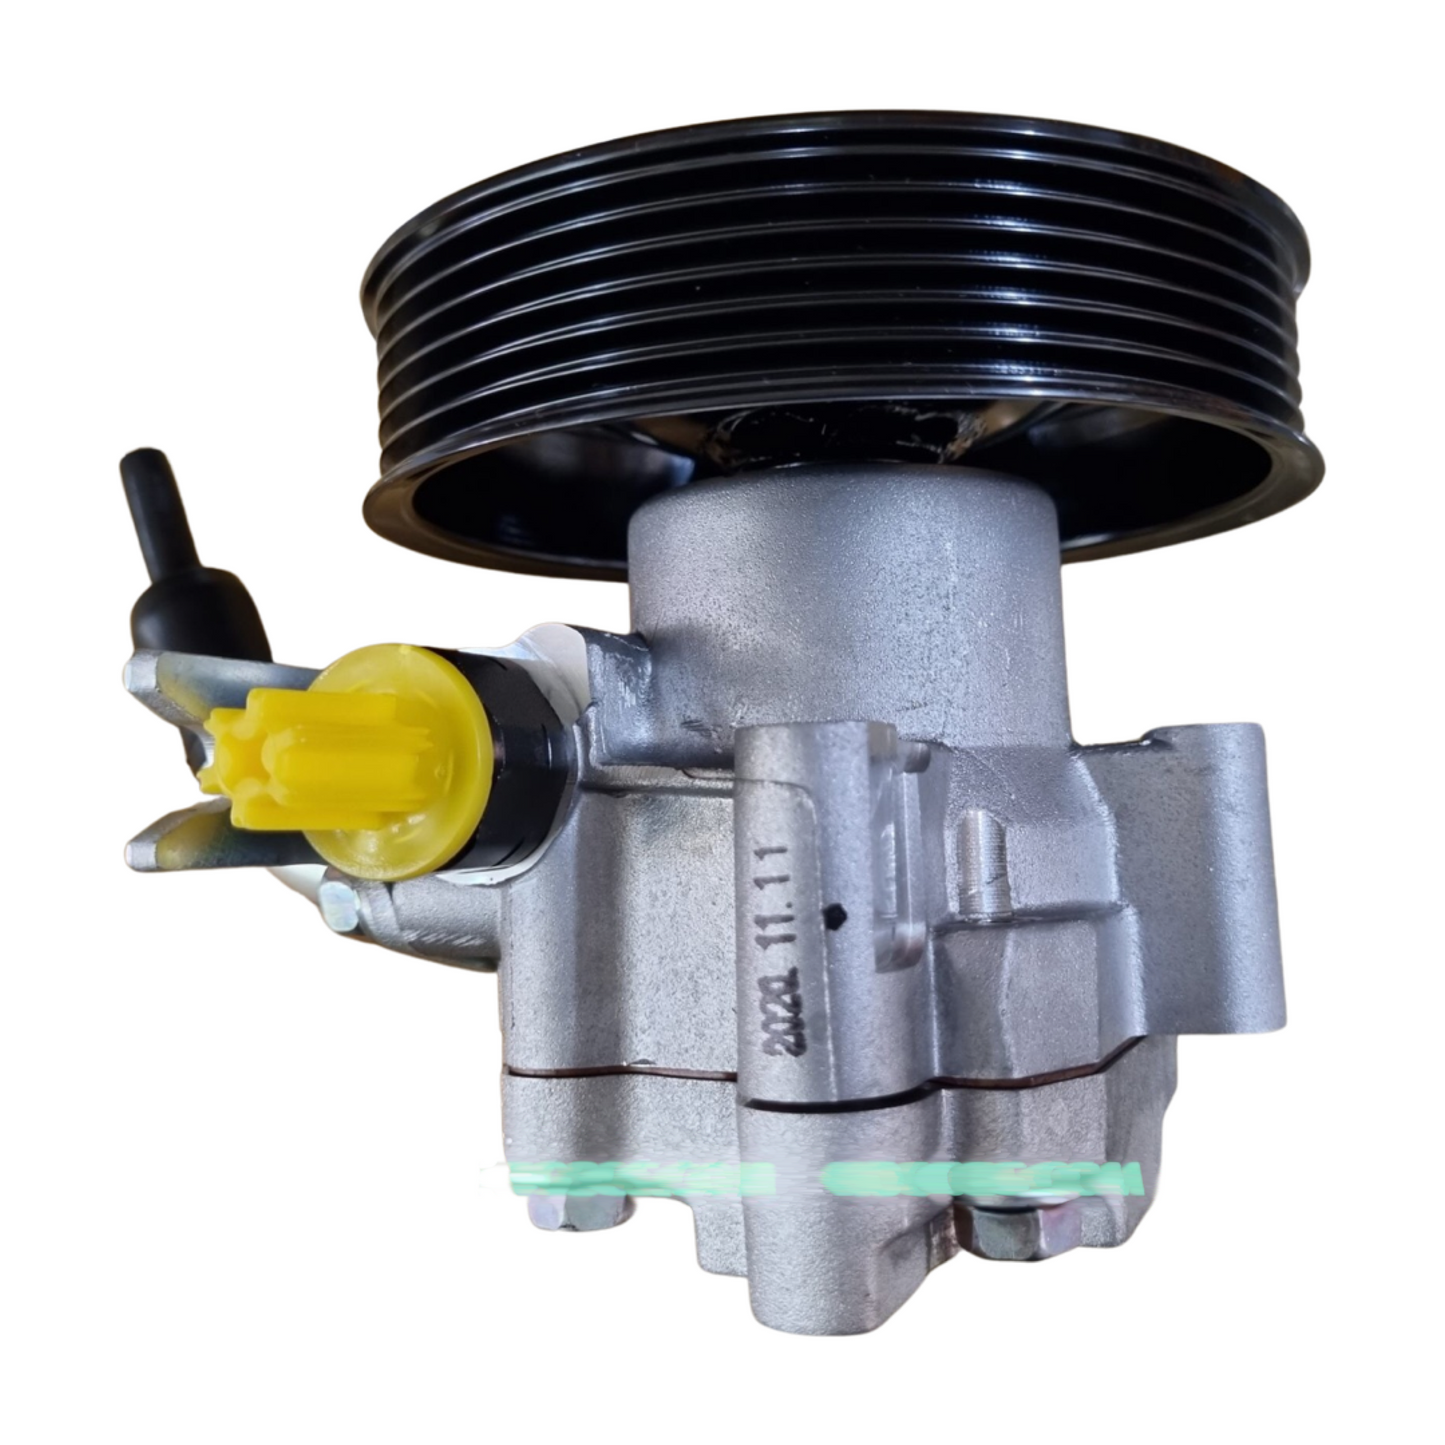 Genuine SsangYong Power Steering Pump for Rexton & Musso.